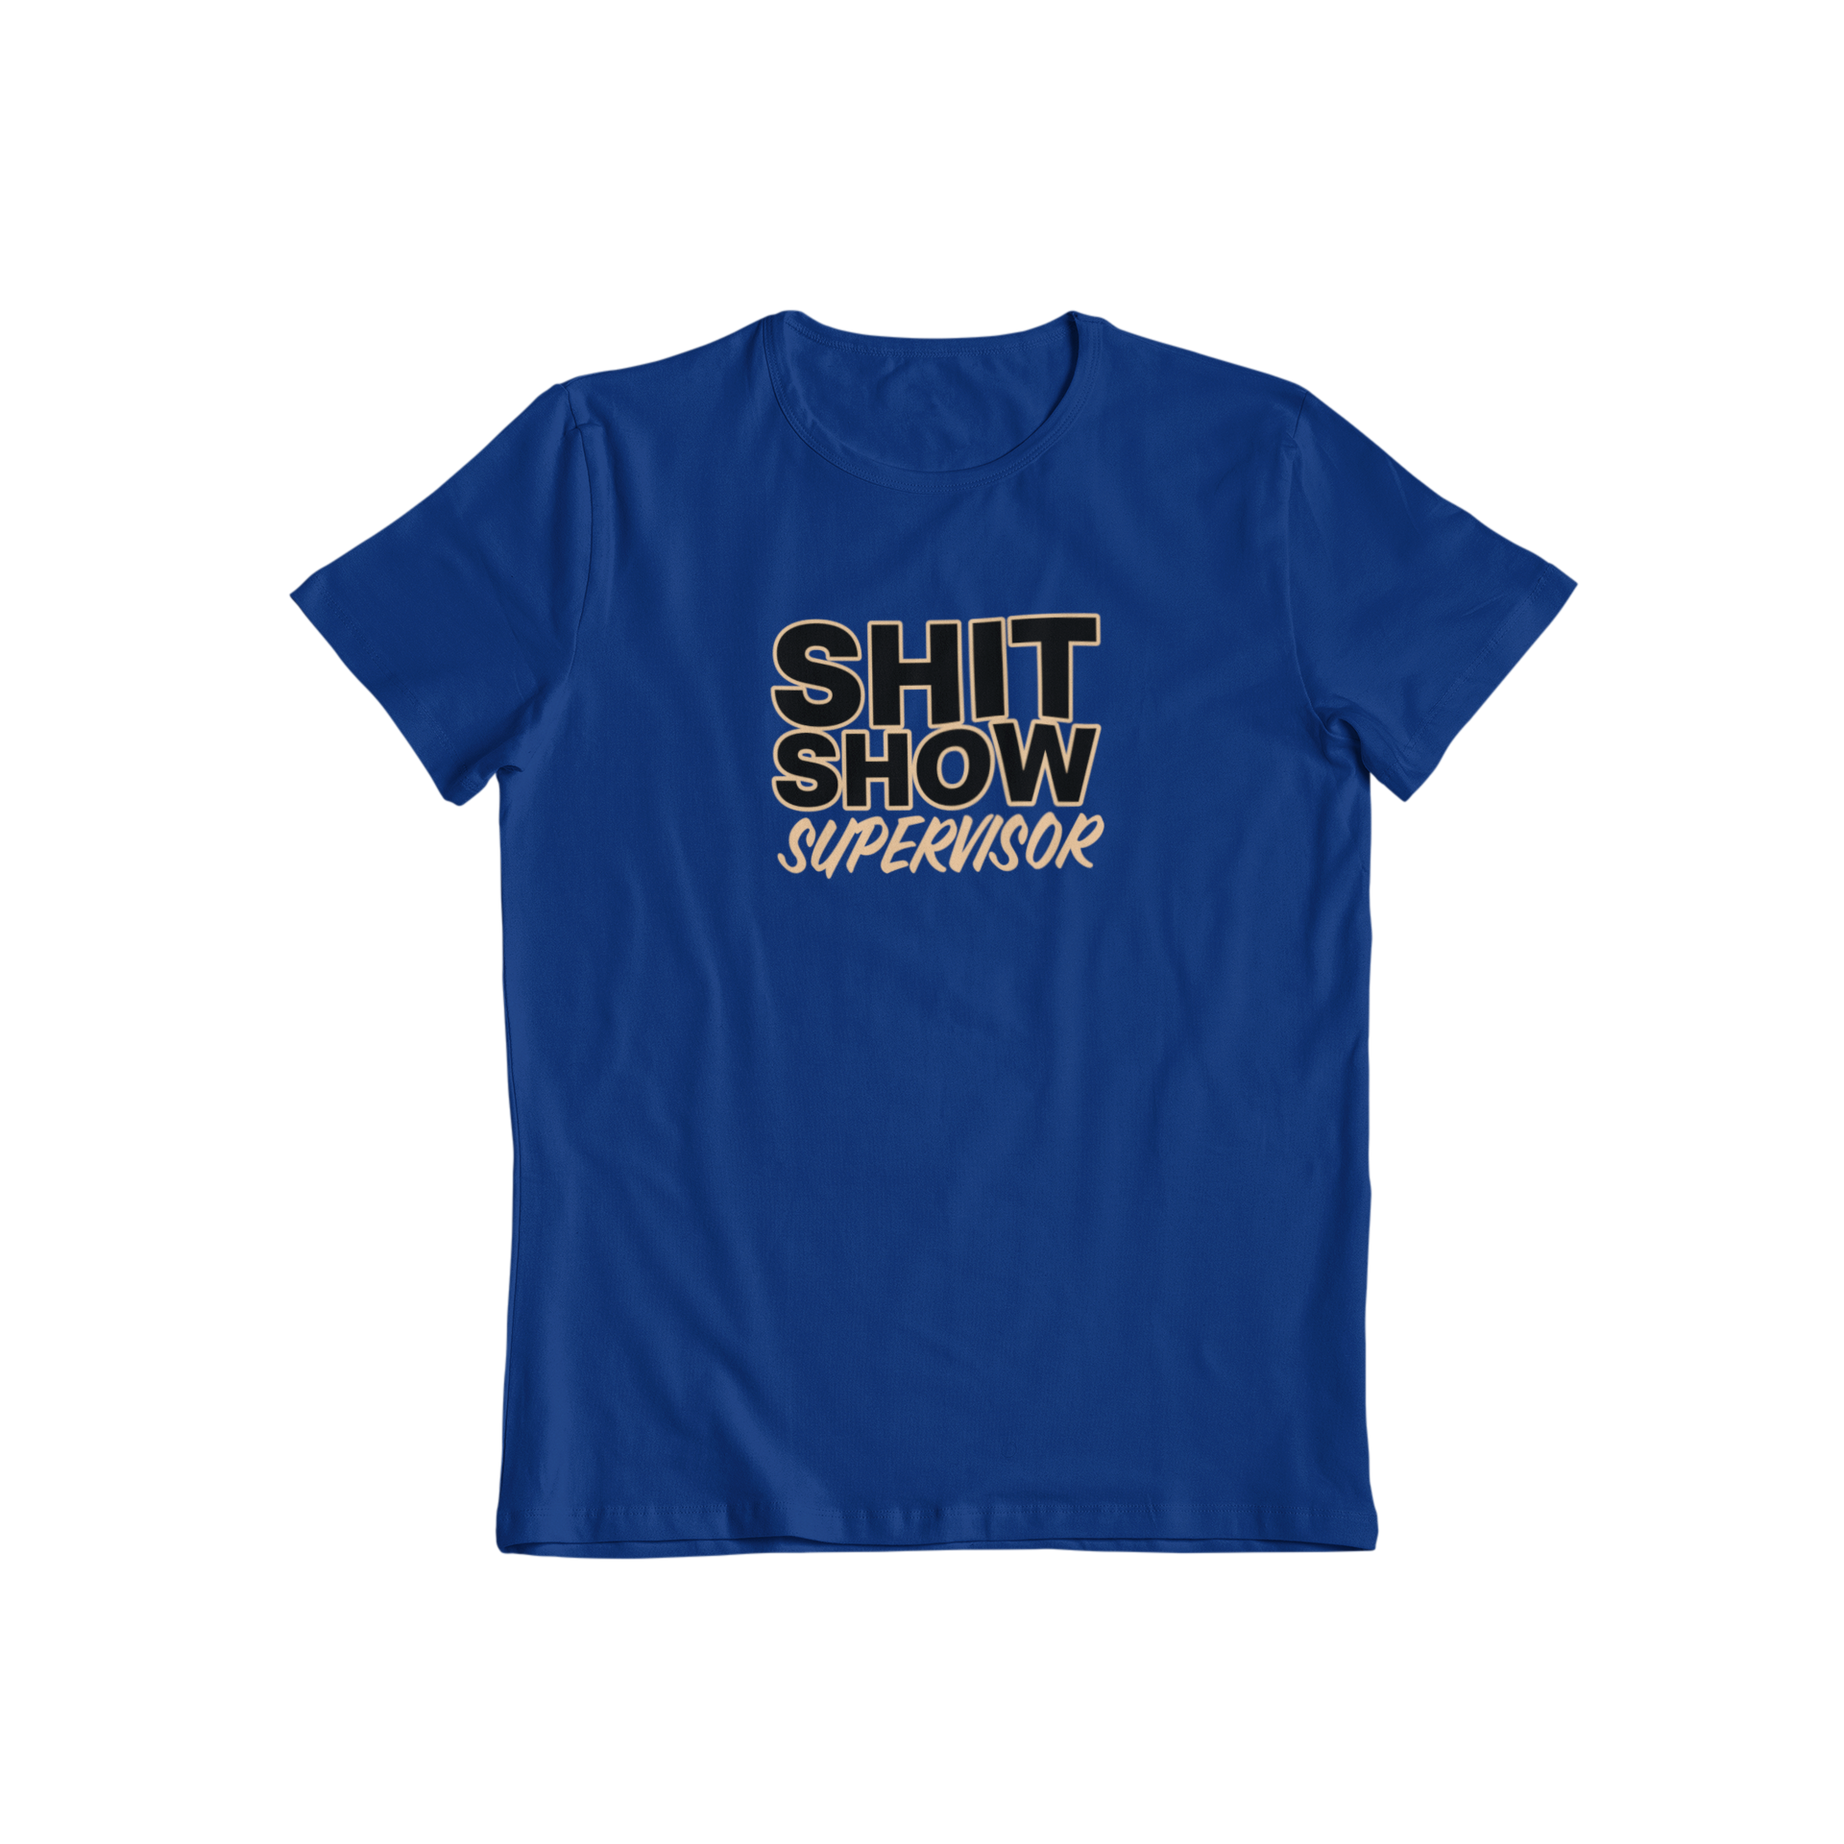 Looking for a funny t-shirt to brighten up your day? Teevolution has the perfect t-shirt for you! Our "Shit Show Supervisor" t-shirt is a classic and hilarious slogan that is sure to make you smile. Get yours today and turn your bad day into a good one!